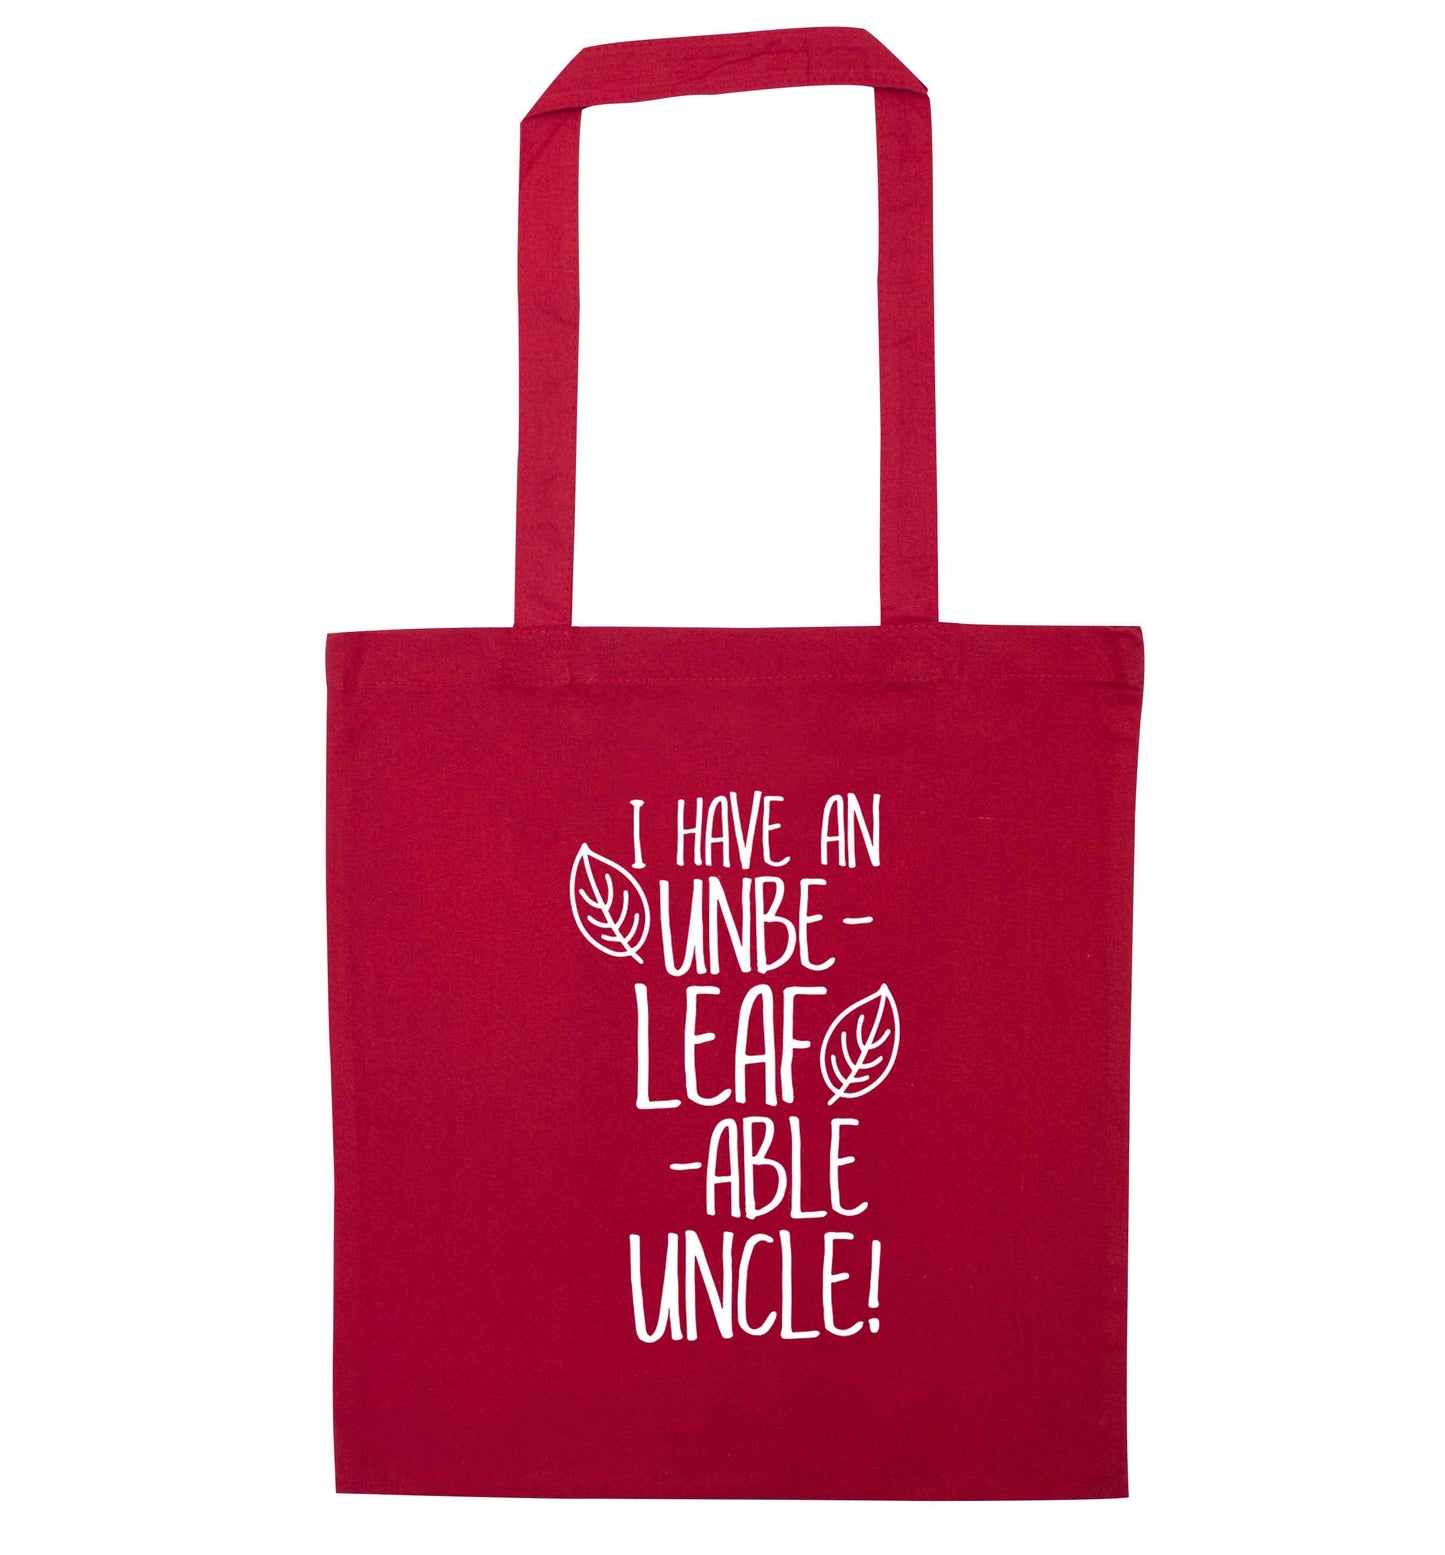 I have an unbe-leaf-able uncle red tote bag